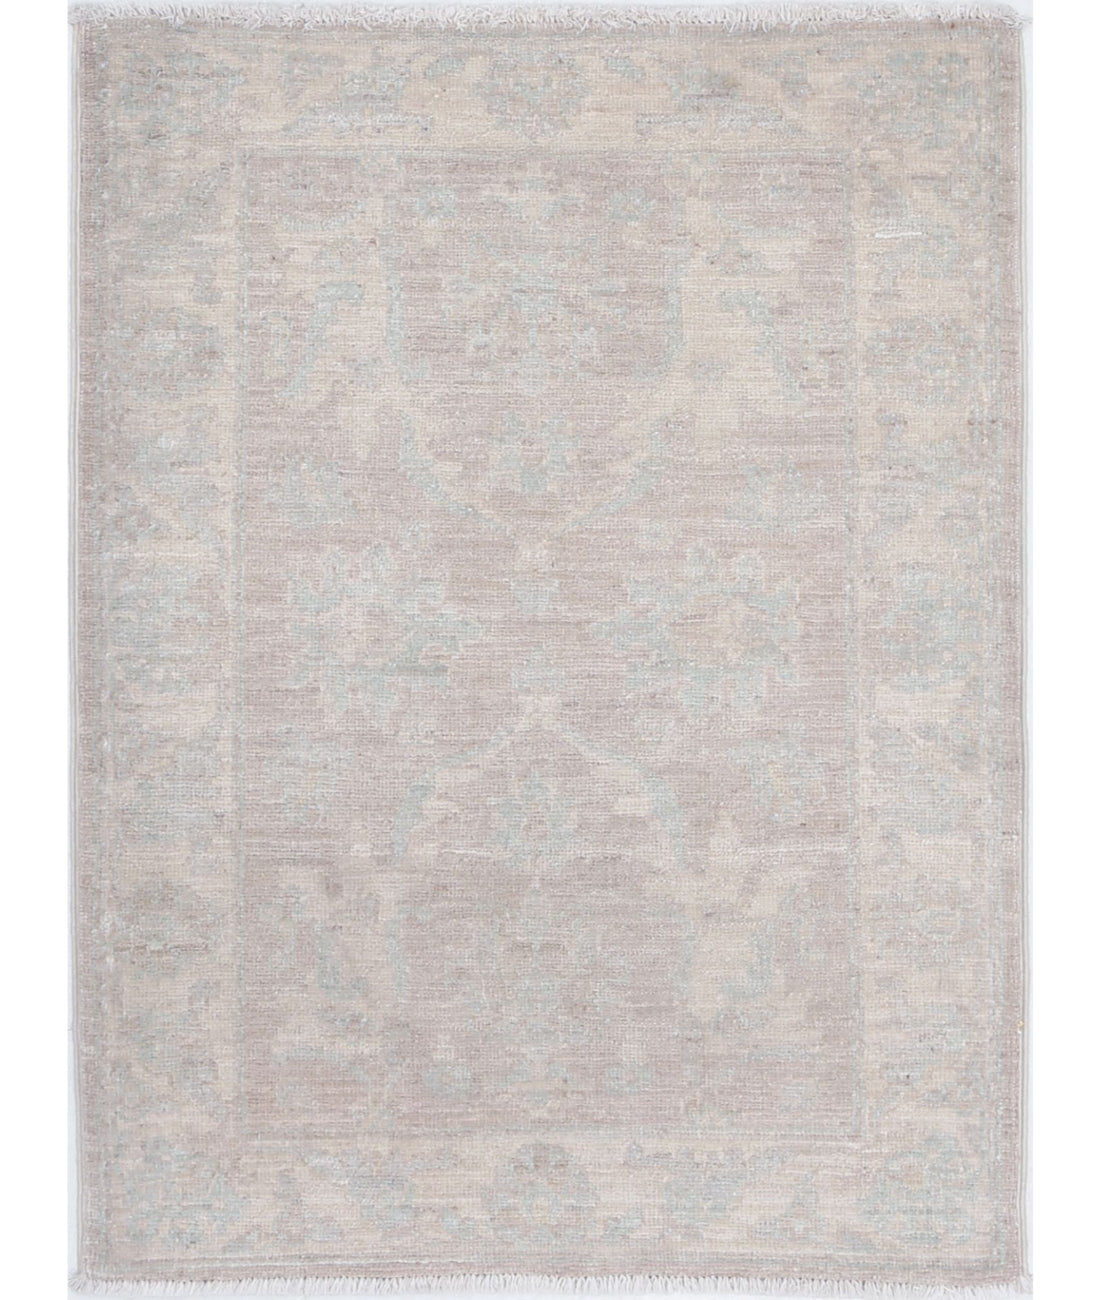 Hand Knotted Serenity Wool Rug - 2'1'' x 2'10'' 2'1'' x 2'10'' (63 X 85) / Brown / Ivory